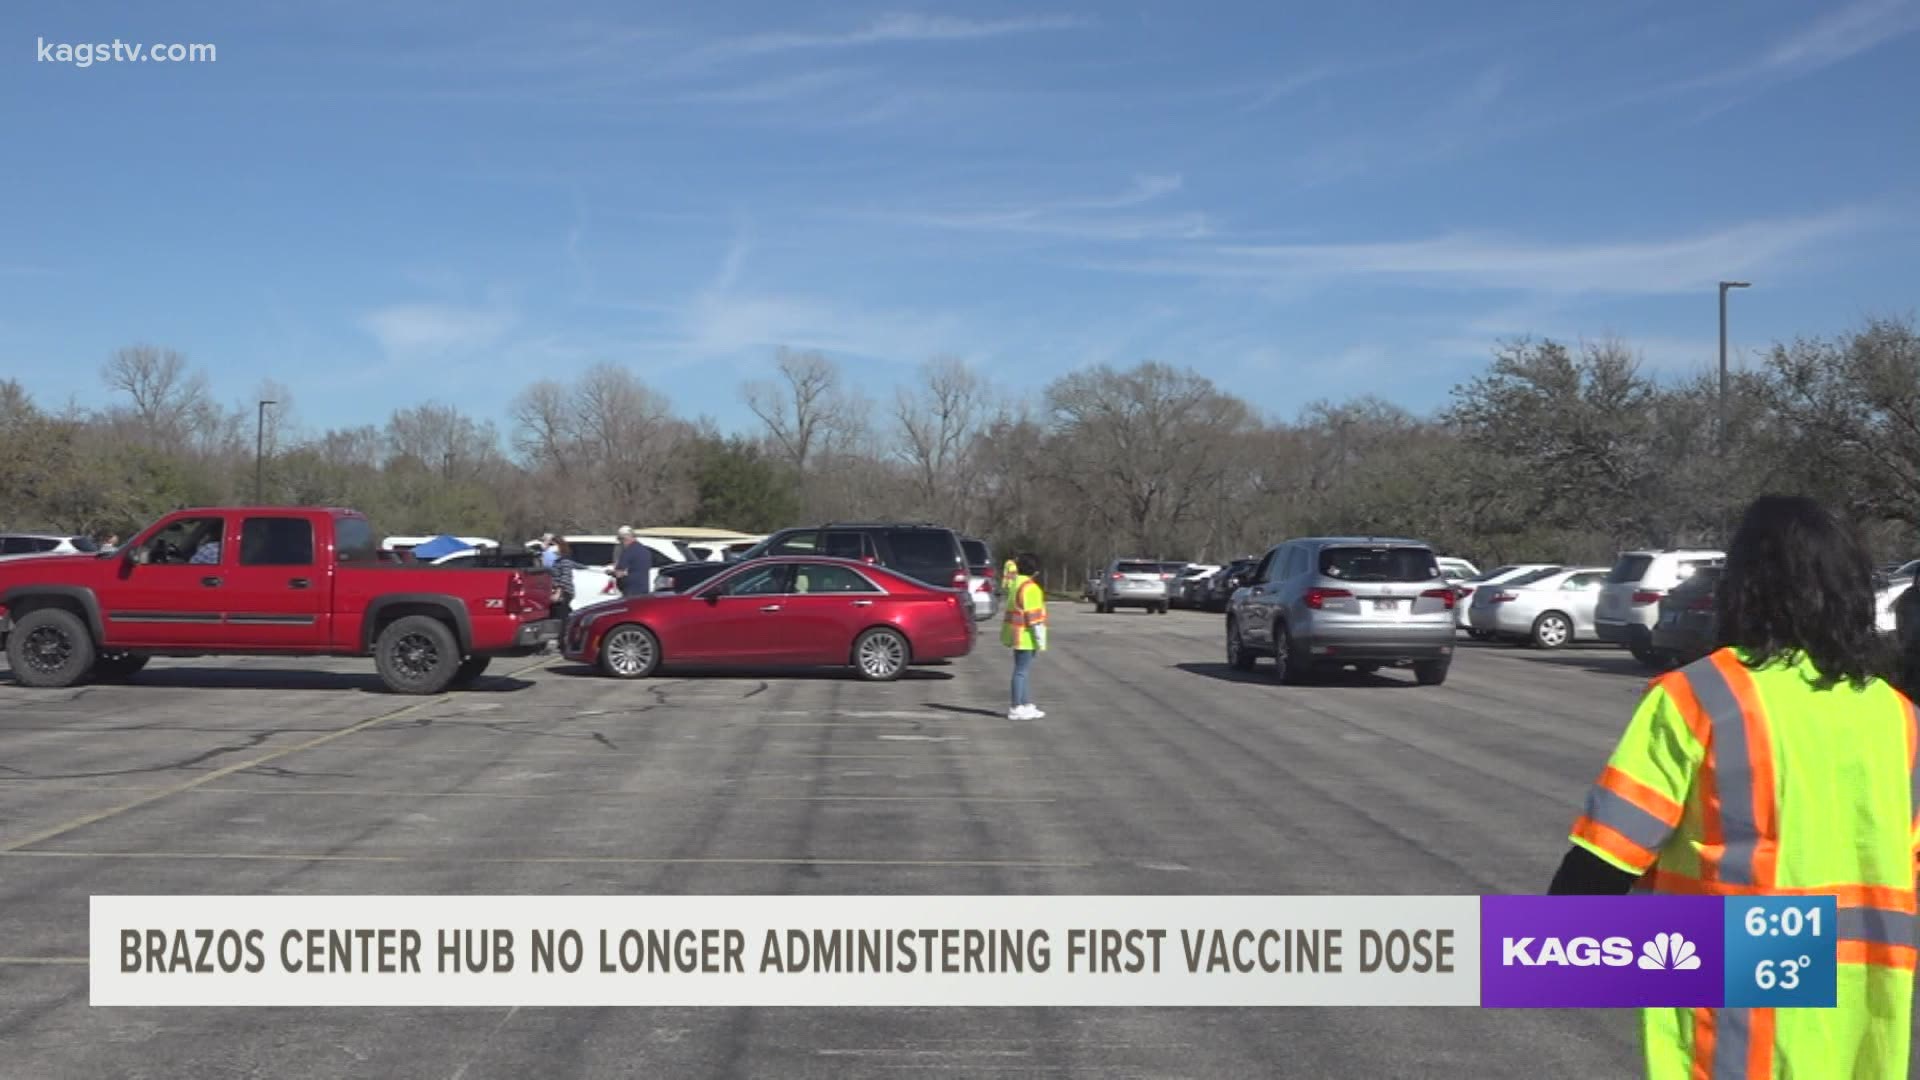 The Brazos Center Vaccine Hub administered its last first dose of the COVID-19 vaccine a week ago.